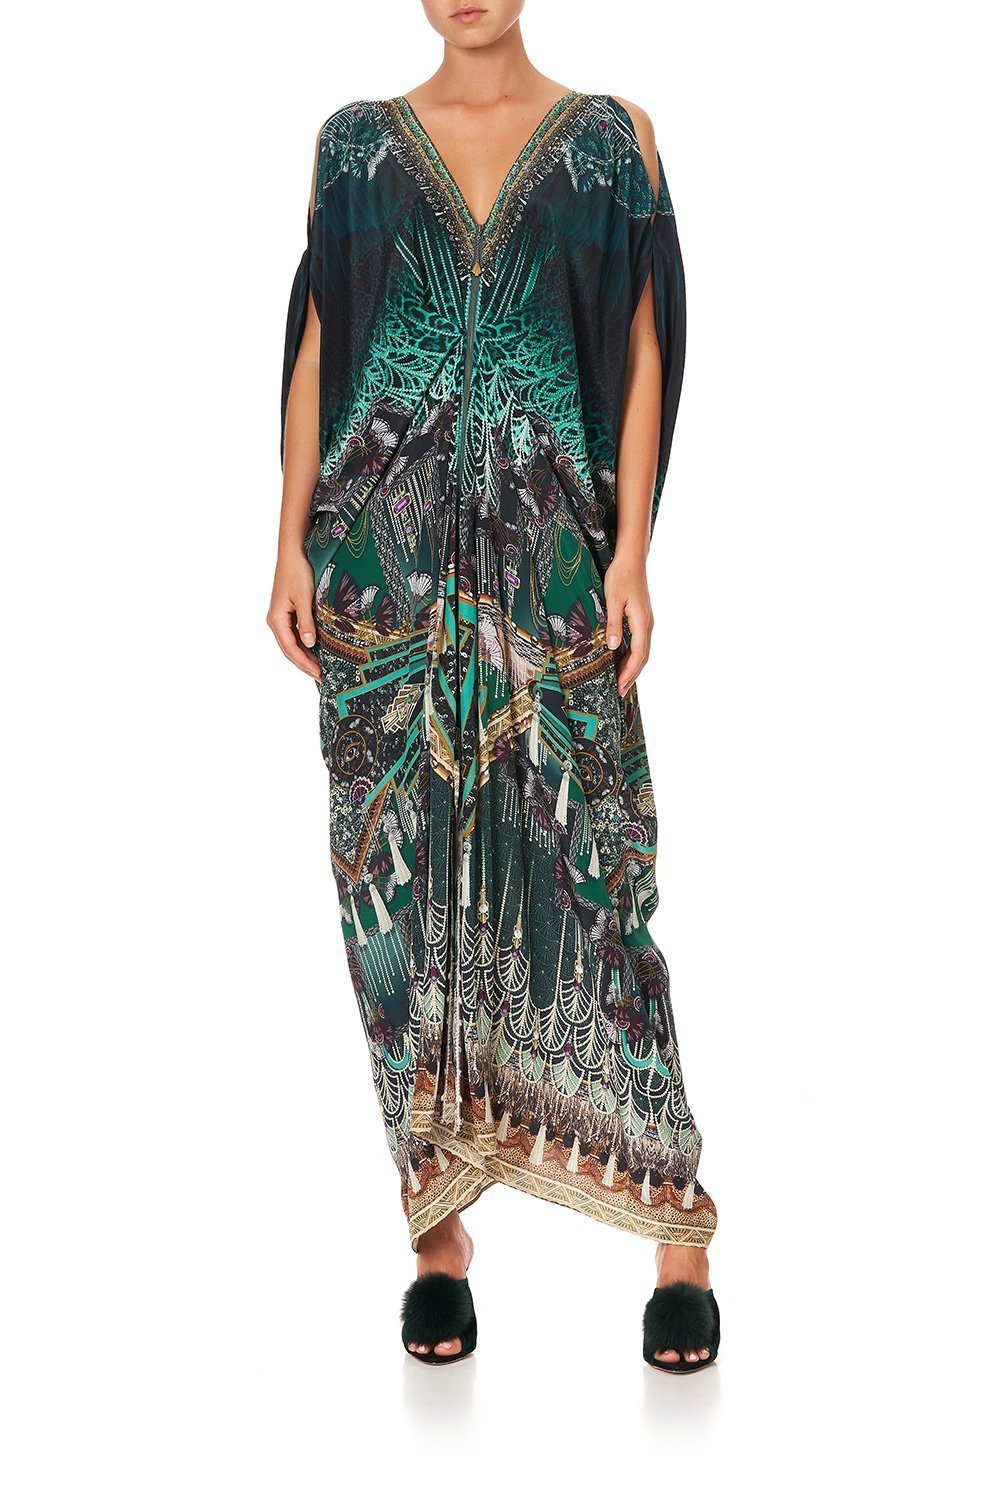 LONG DRAPE DRESS WITH ZIP FRONT FITZGERALDS FLAPPER – CAMILLA